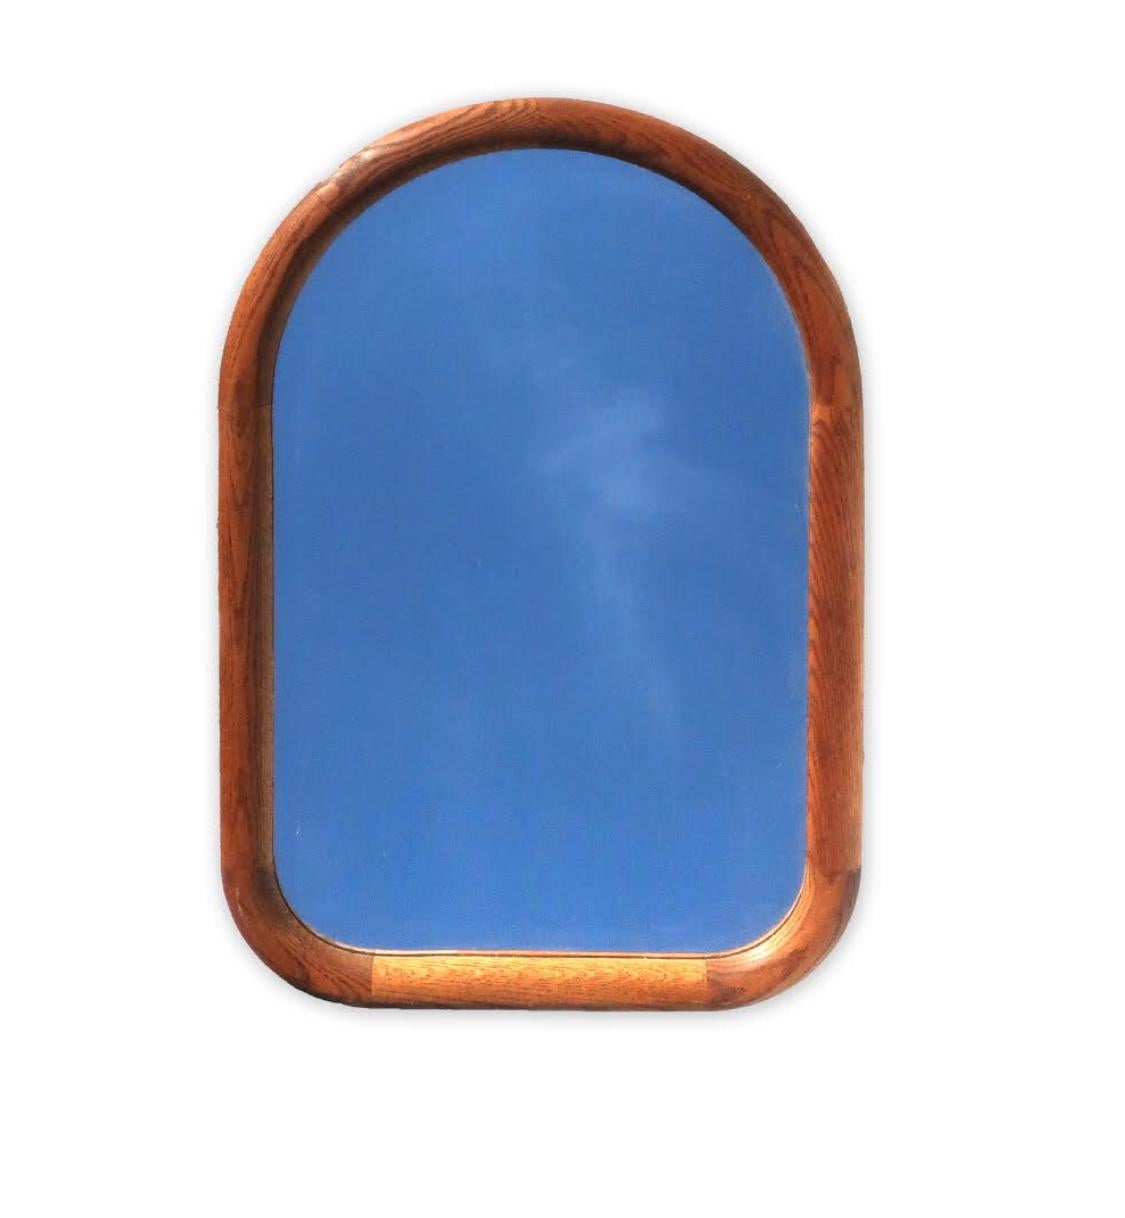 A handsome Mid-Century Modern wall mirror with an arched oak frame and clean lines that will match most any decor. 

Excellent vintage condition.

Measures: 20” x 31” x 1”.
    